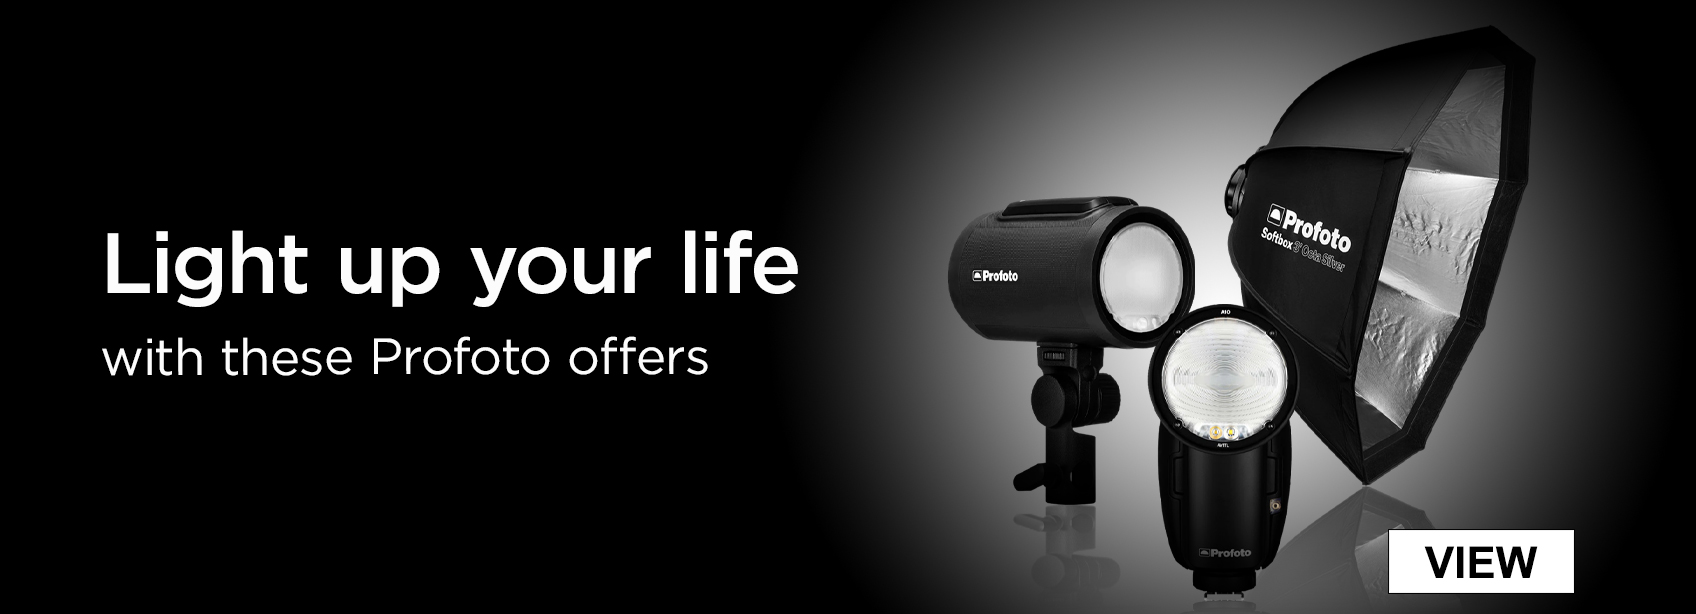 Light up your life with these Profoto offers